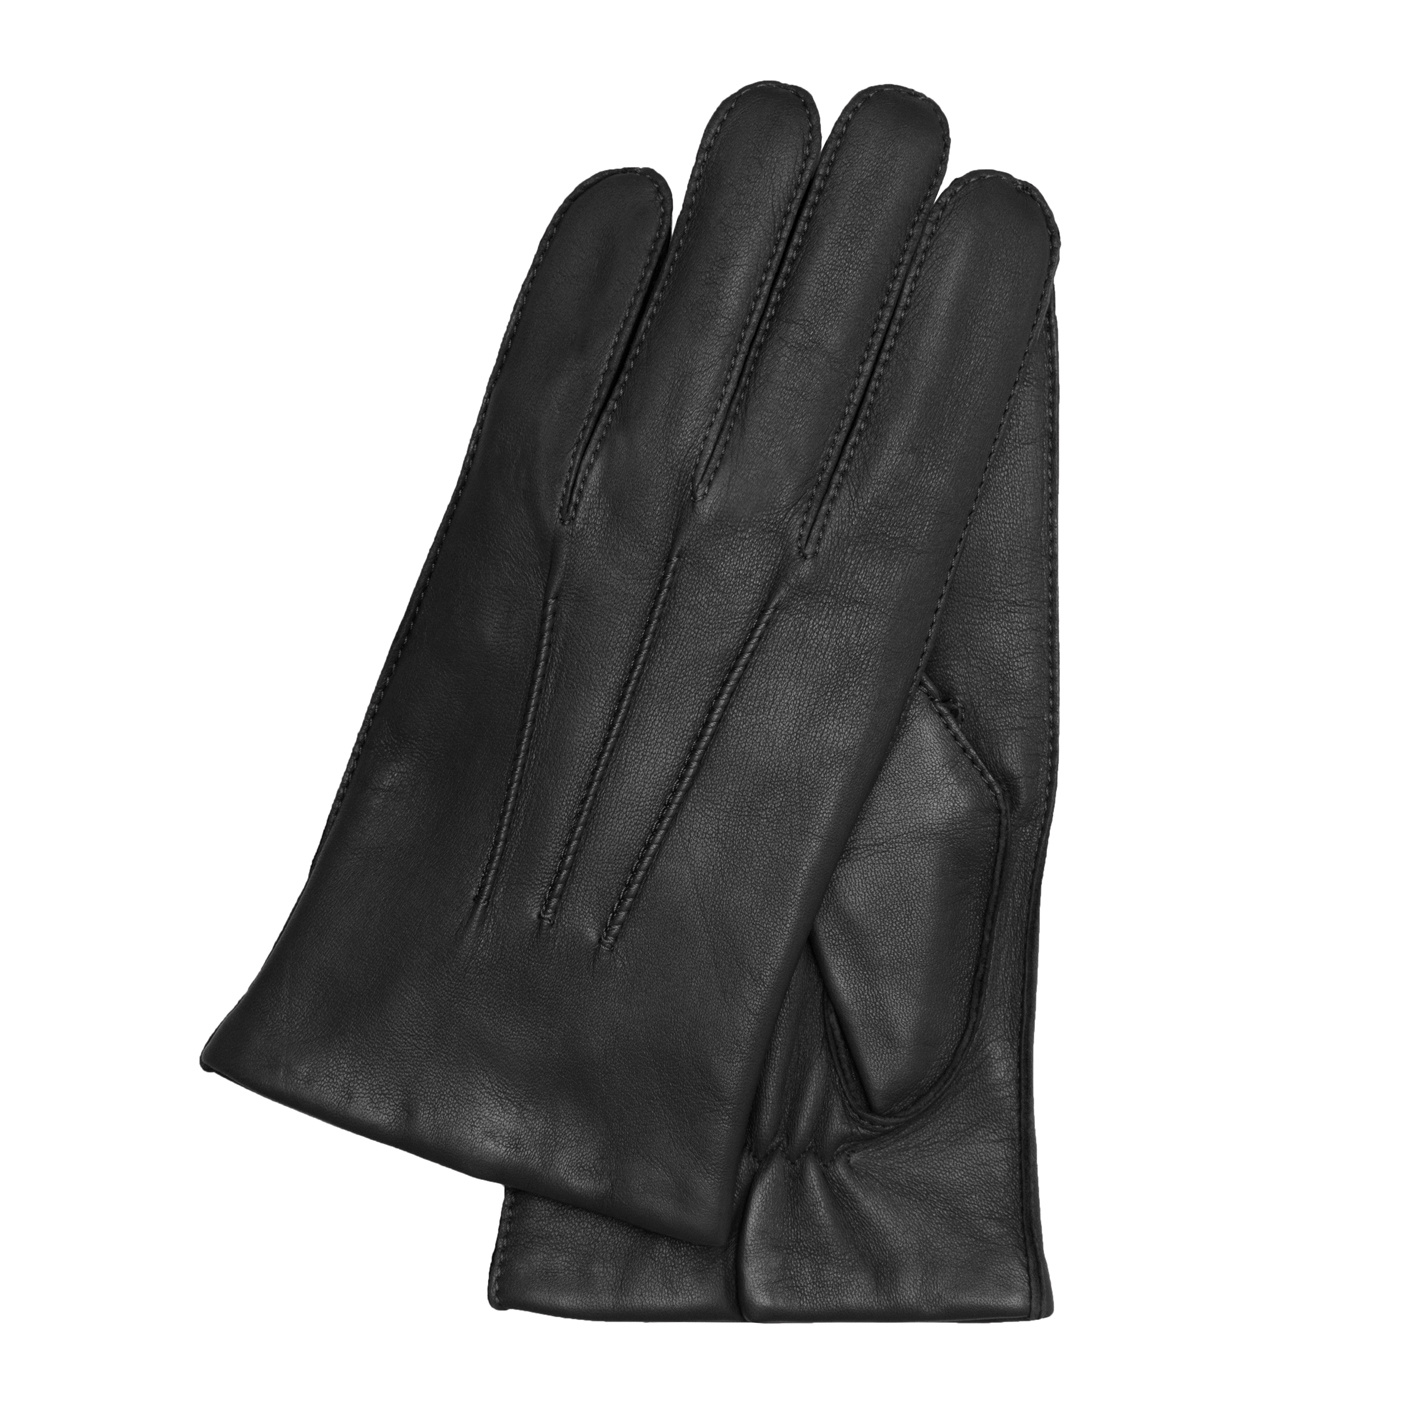 Black Leather - M Glove Kessler Boots by 